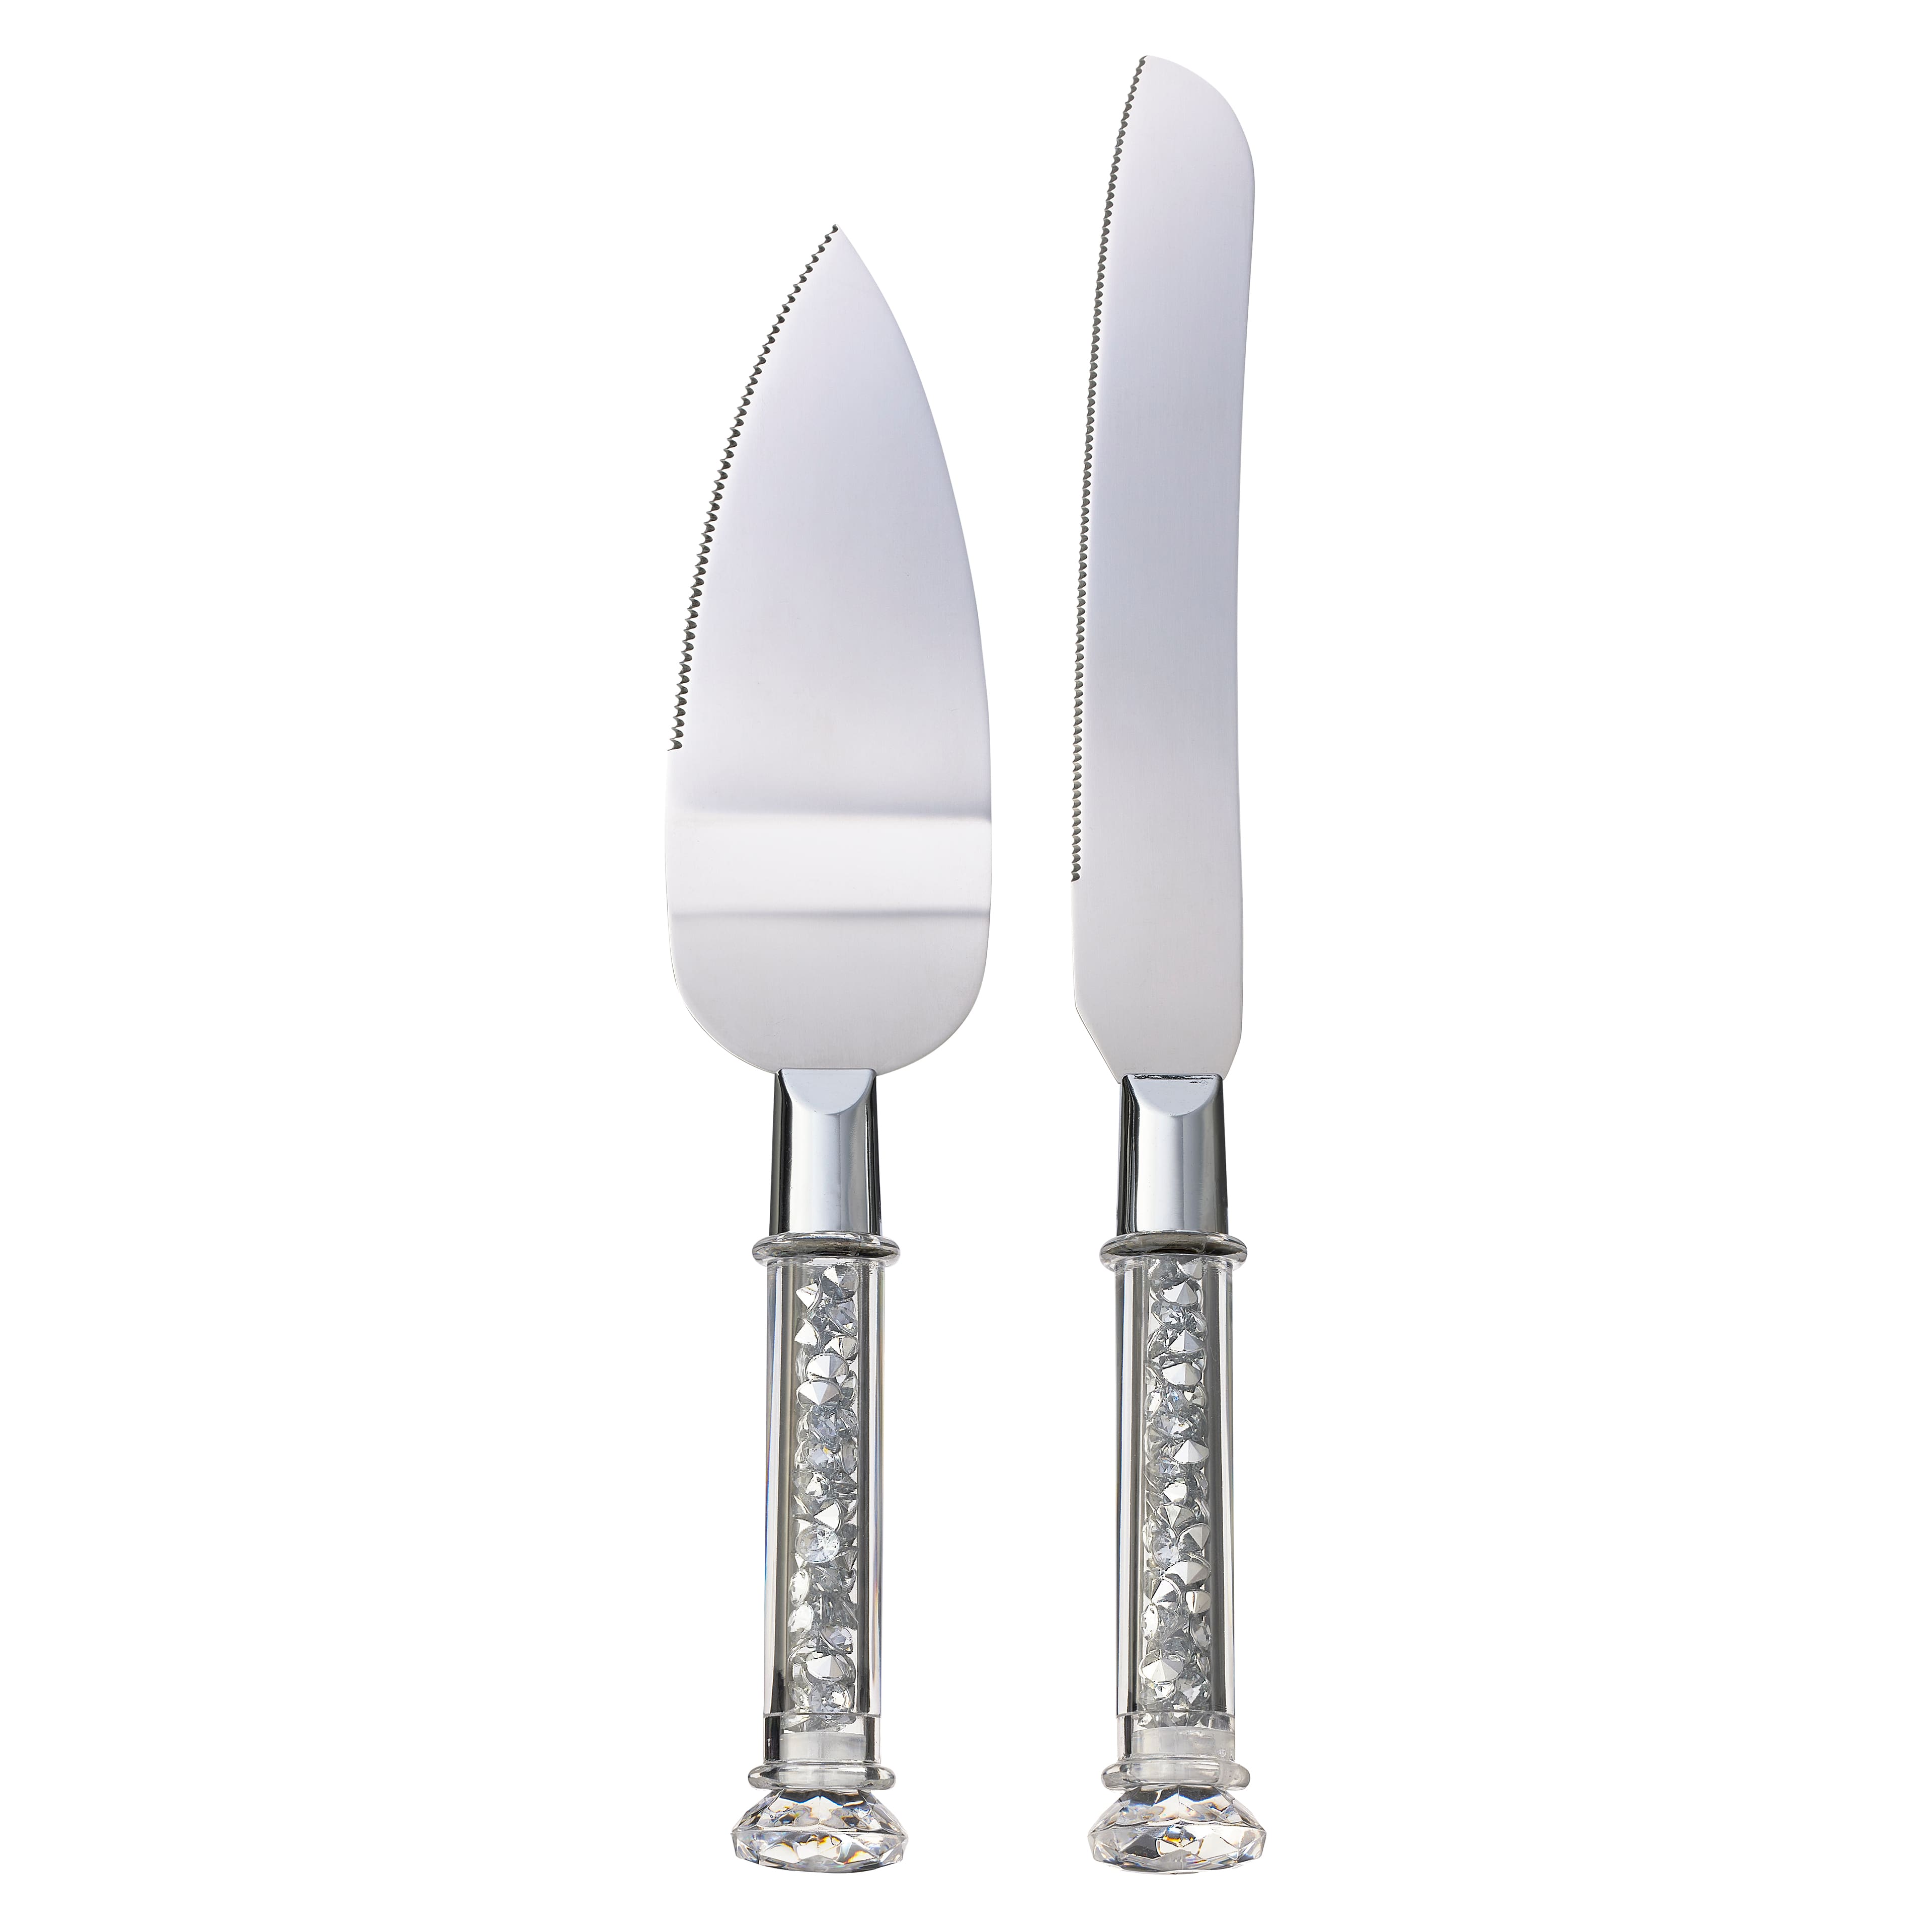 2 Set  Stainless Steel Knife and Server Party Favors With Handle